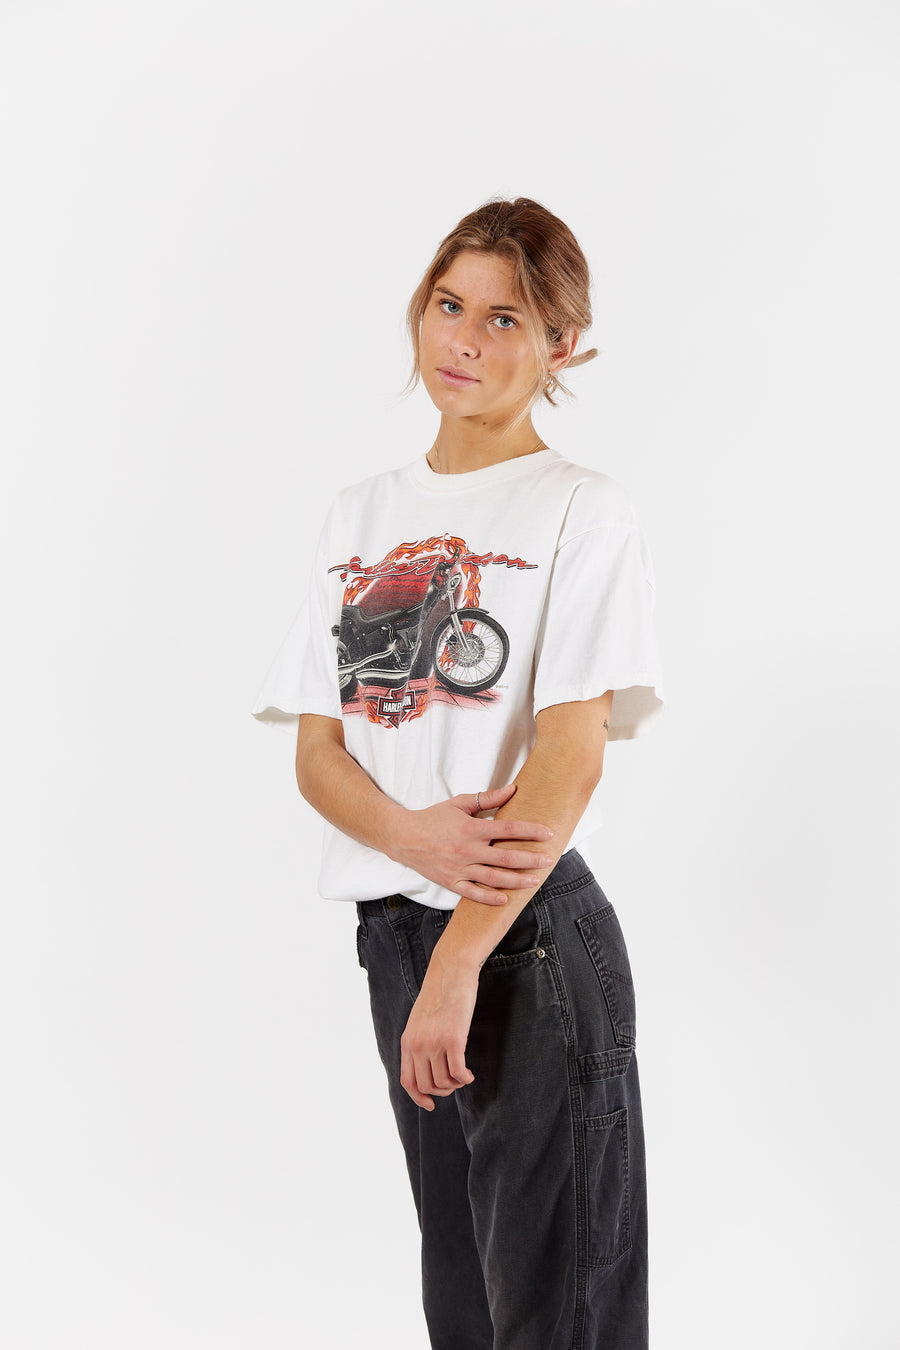 2003 Harley-Davidson Fenwick T-shirt in a vintage style from thrift store Twise Studio